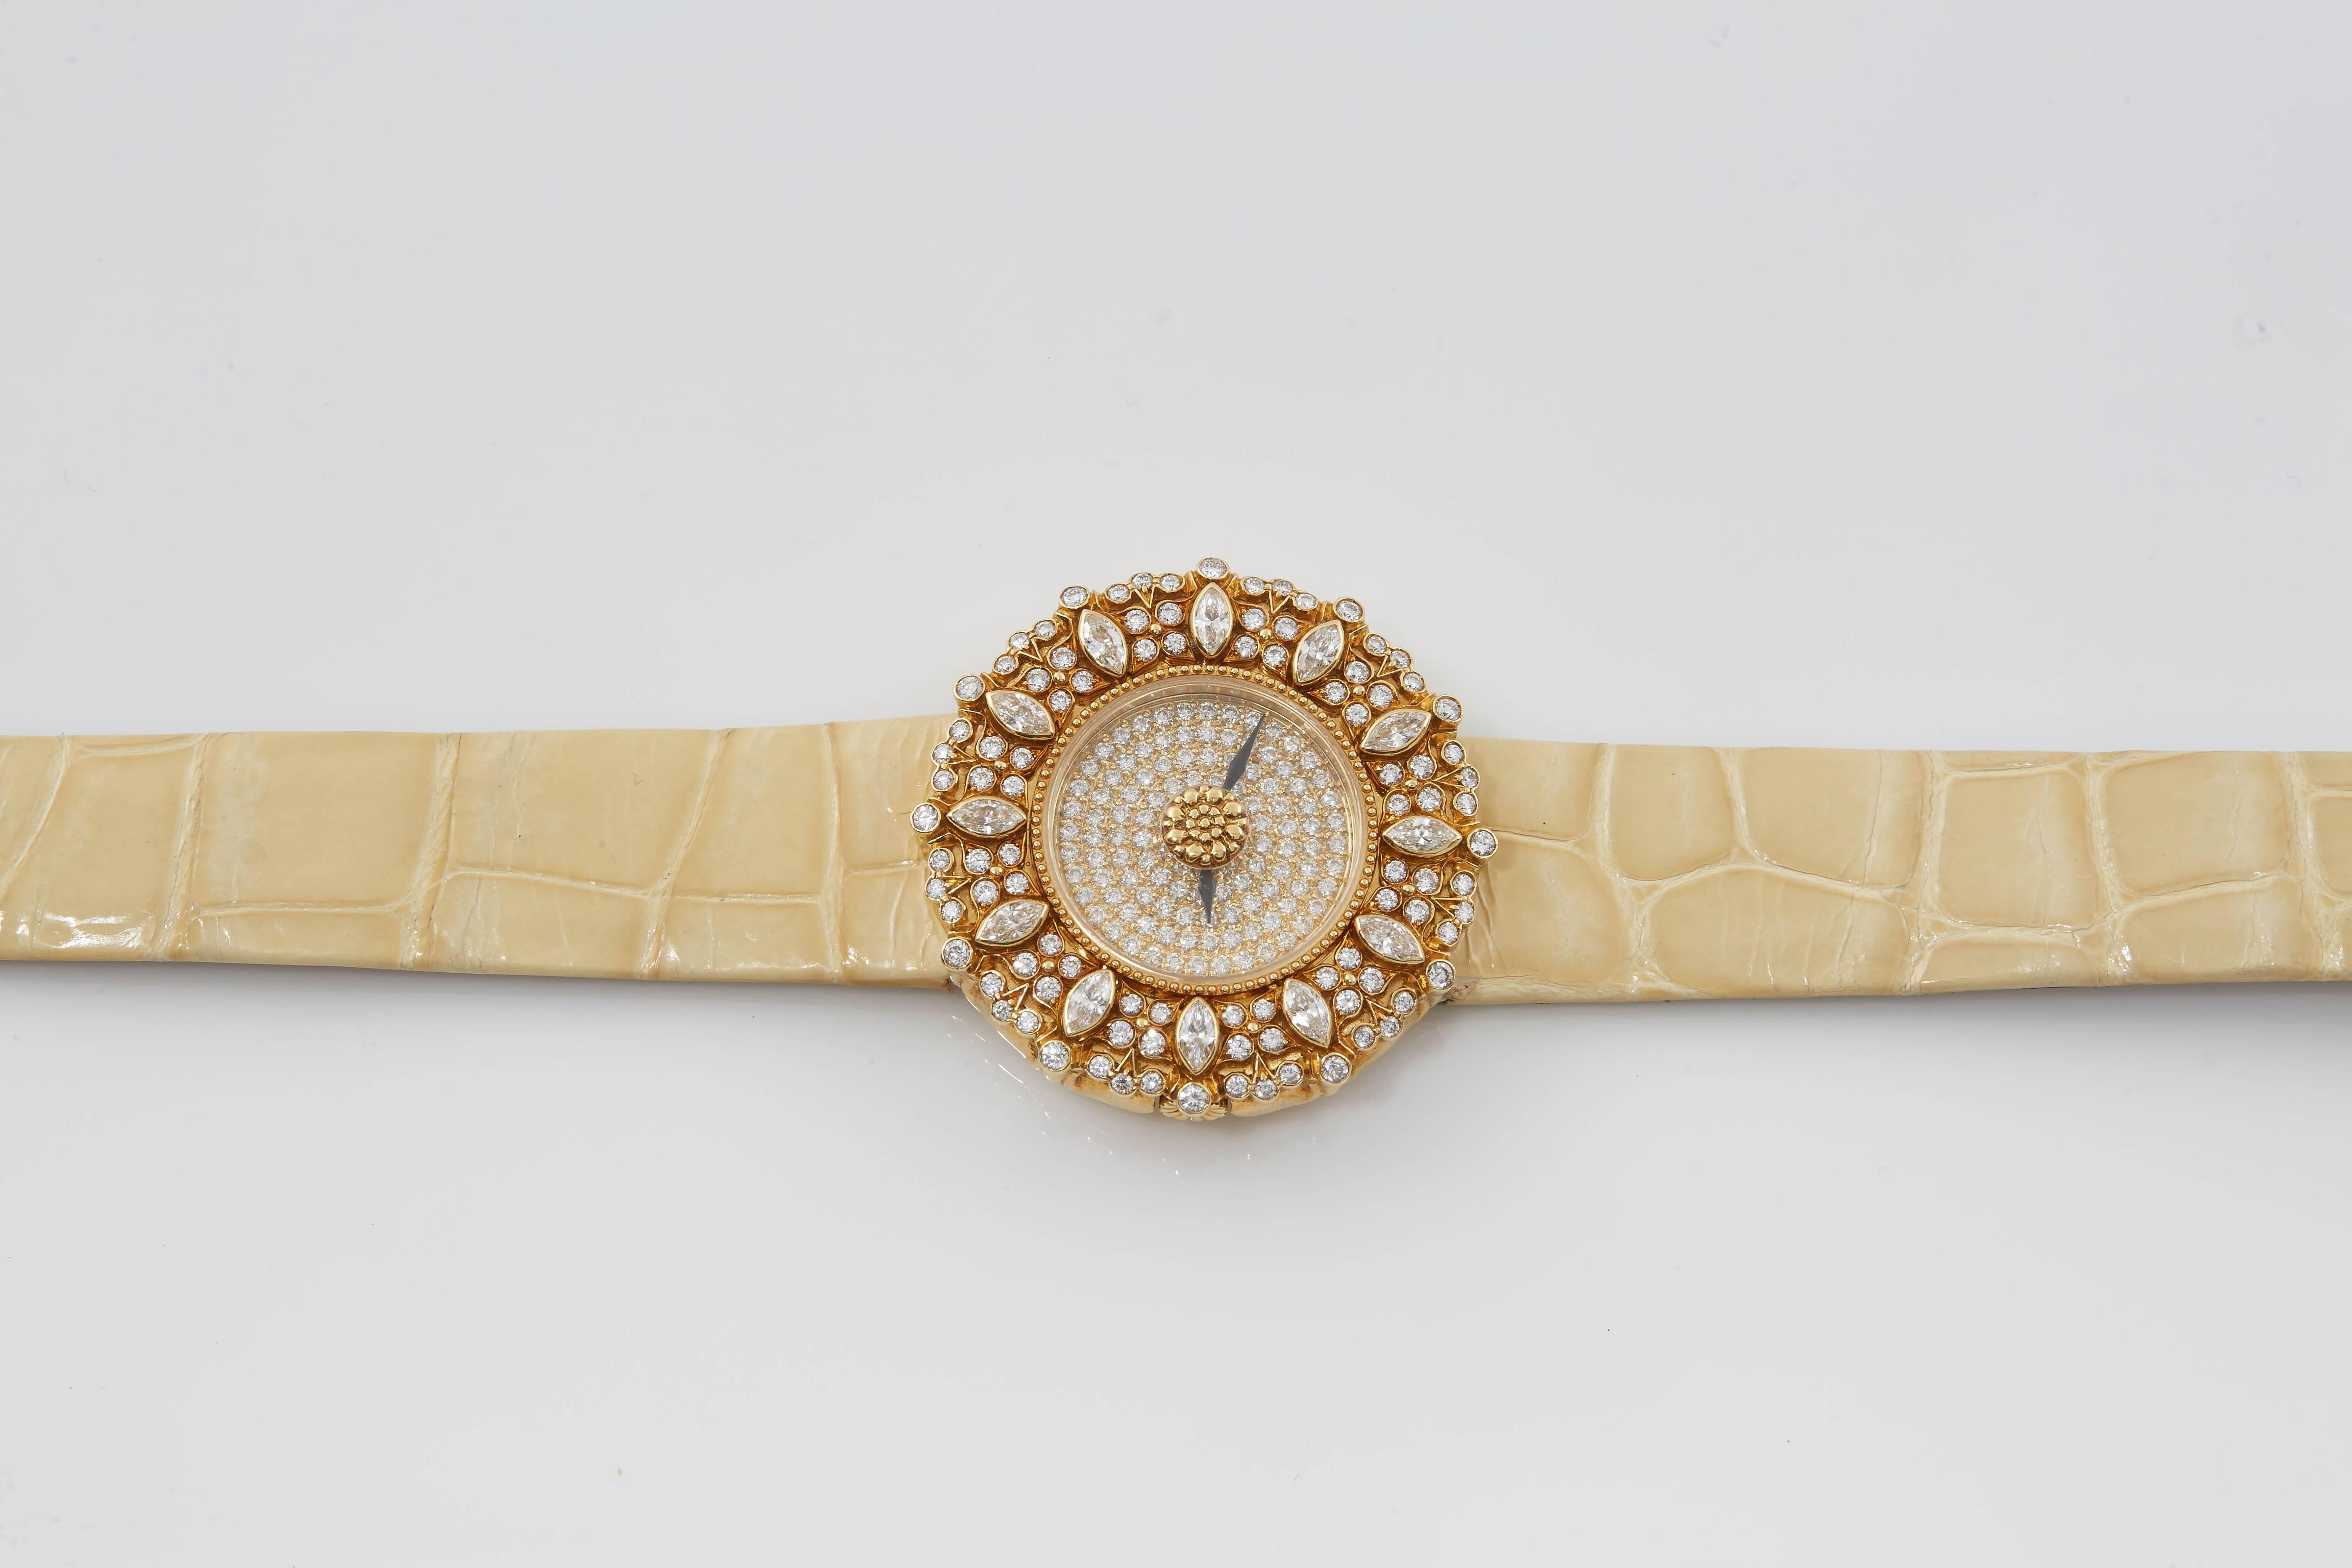 Beautiful watch finely crafted in 18 k yellow gold with high quality diamonds on Genuine Alligator Strap. Sign Buccellati 